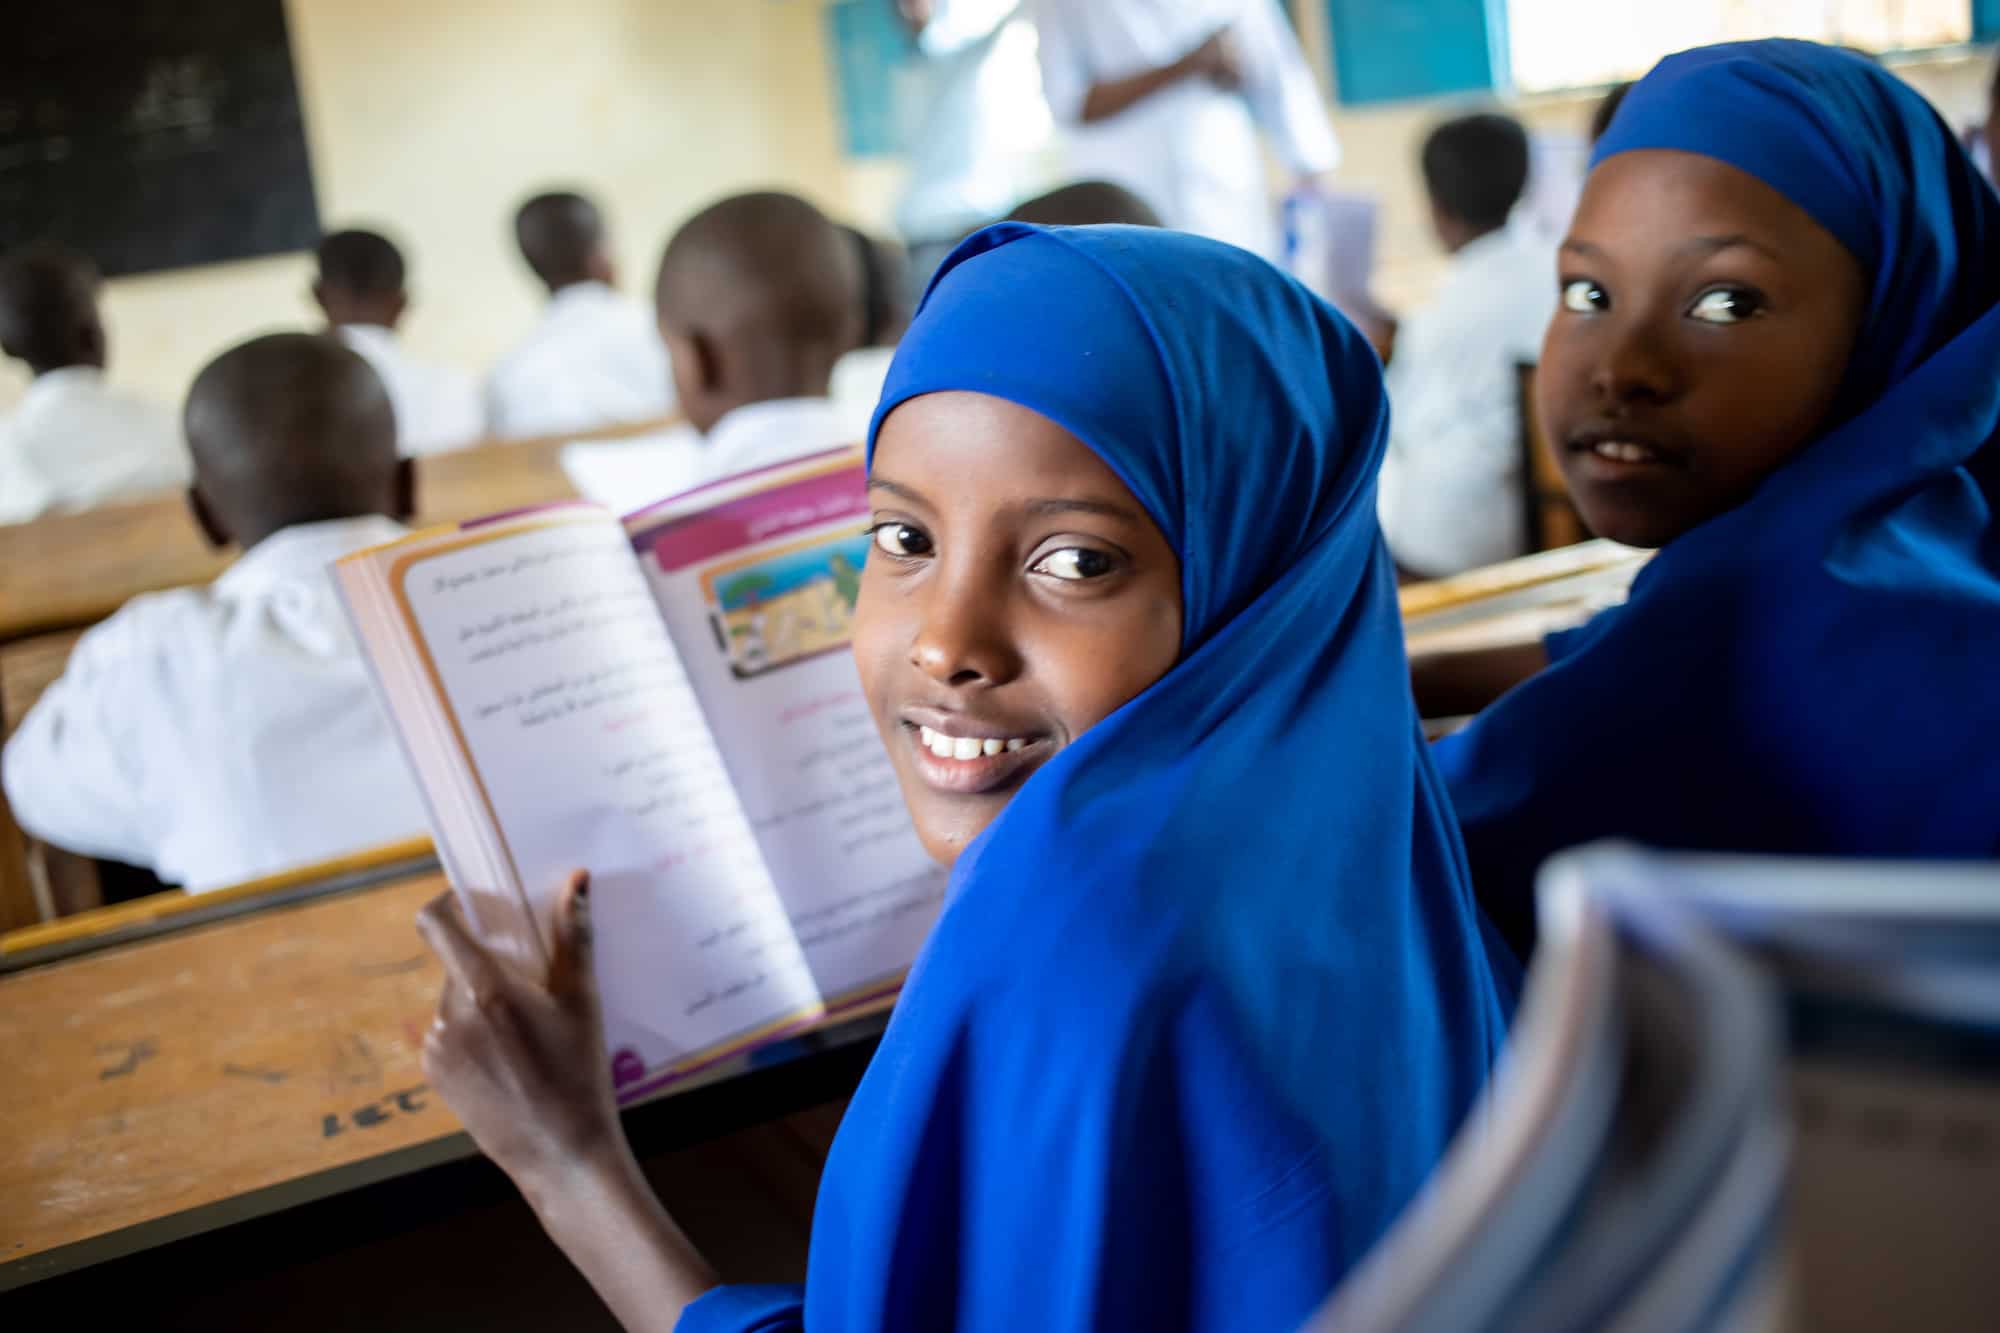 A Somali girl in a blue headscarf sits in the classroom smiling and holding an open book